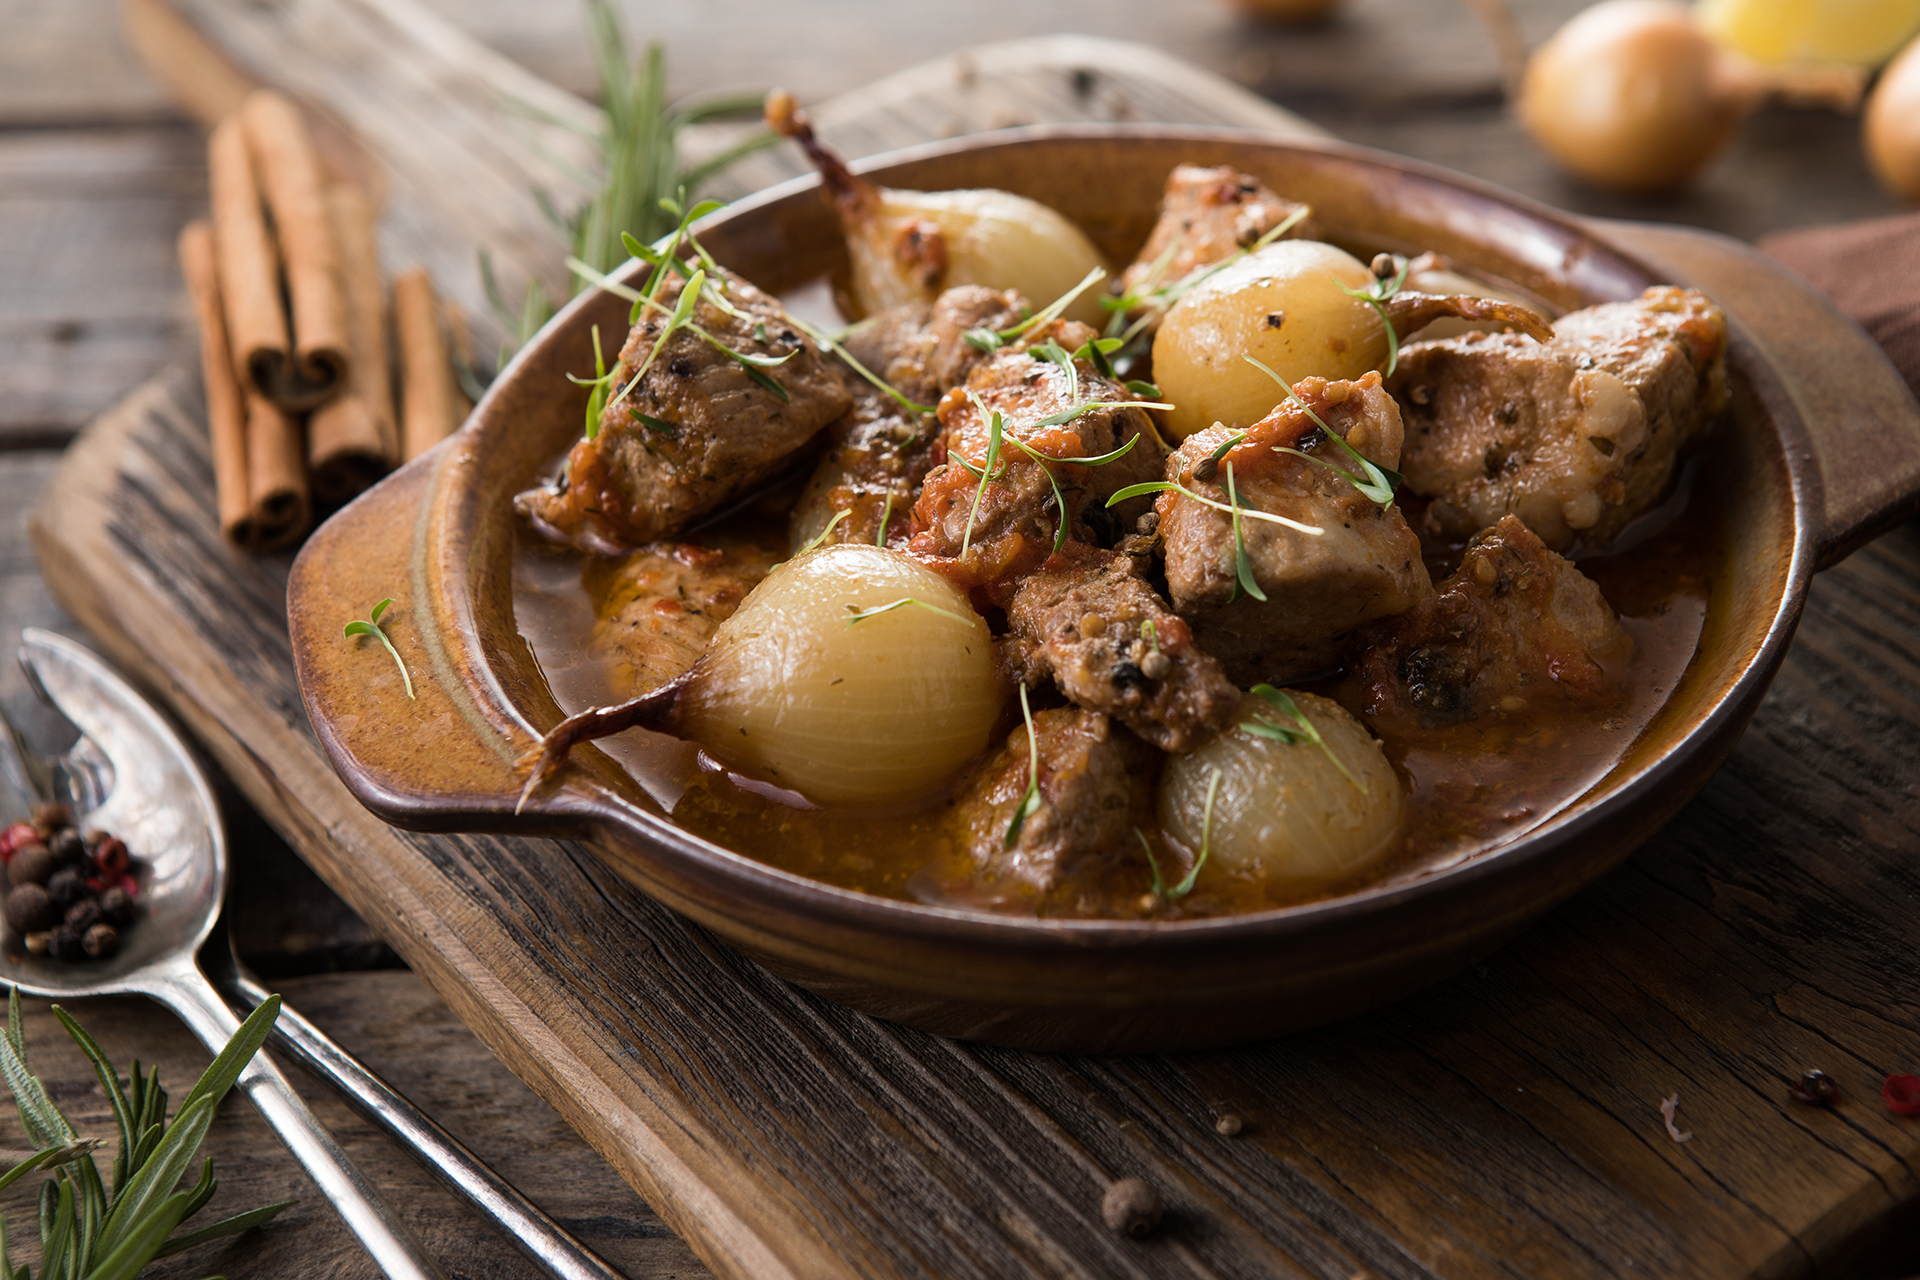 Aromatic beef or rabbit stew cooked with onions, red wine, and spices